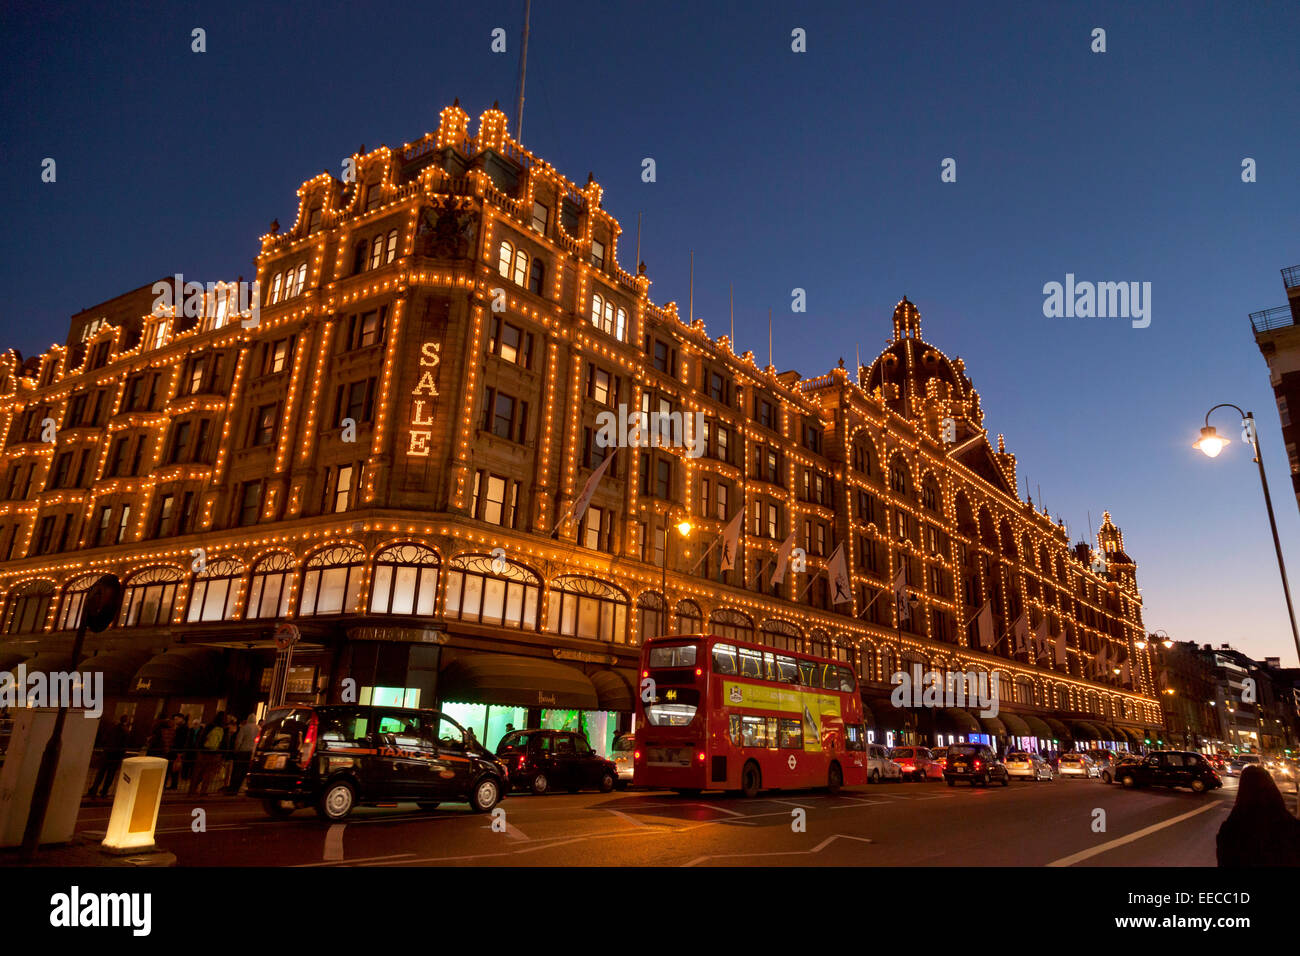 Harrods department store at night, London, UK - Stock Image - C033/8479 -  Science Photo Library